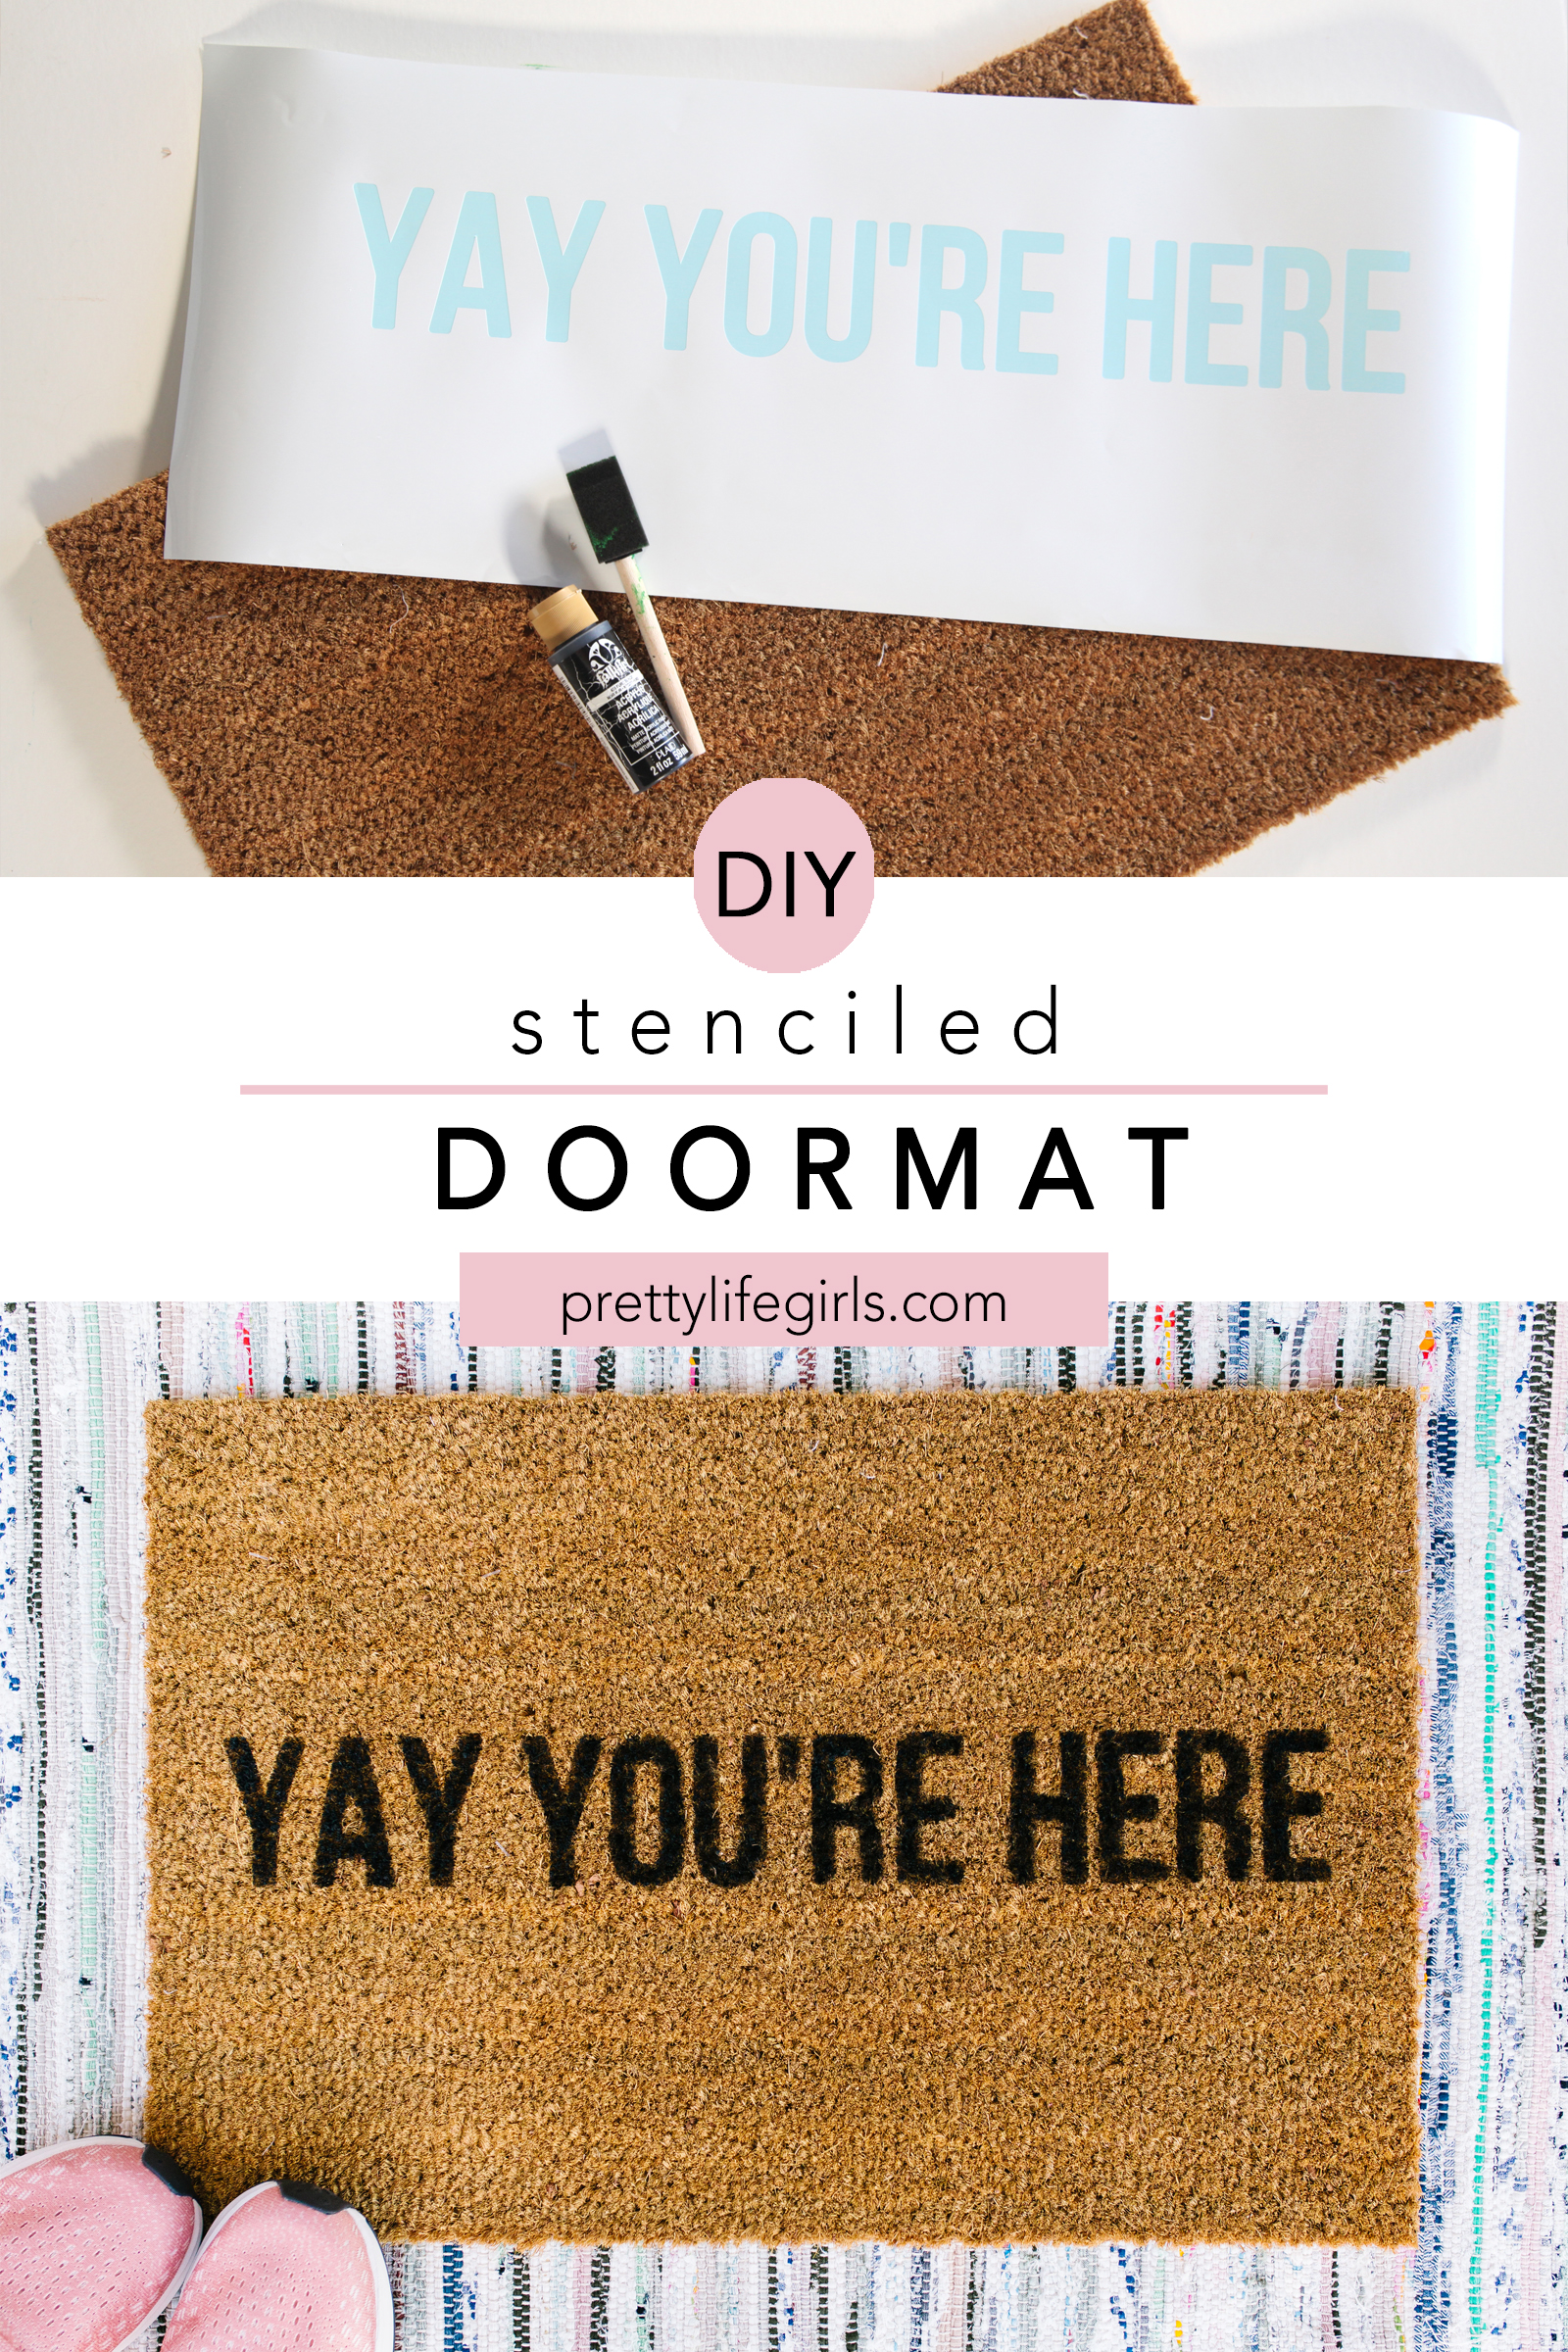 DIY Doormat: How to Make a Stenciled Doormat + a tutorial featured by Top US Craft Blog + The Pretty Life Girls